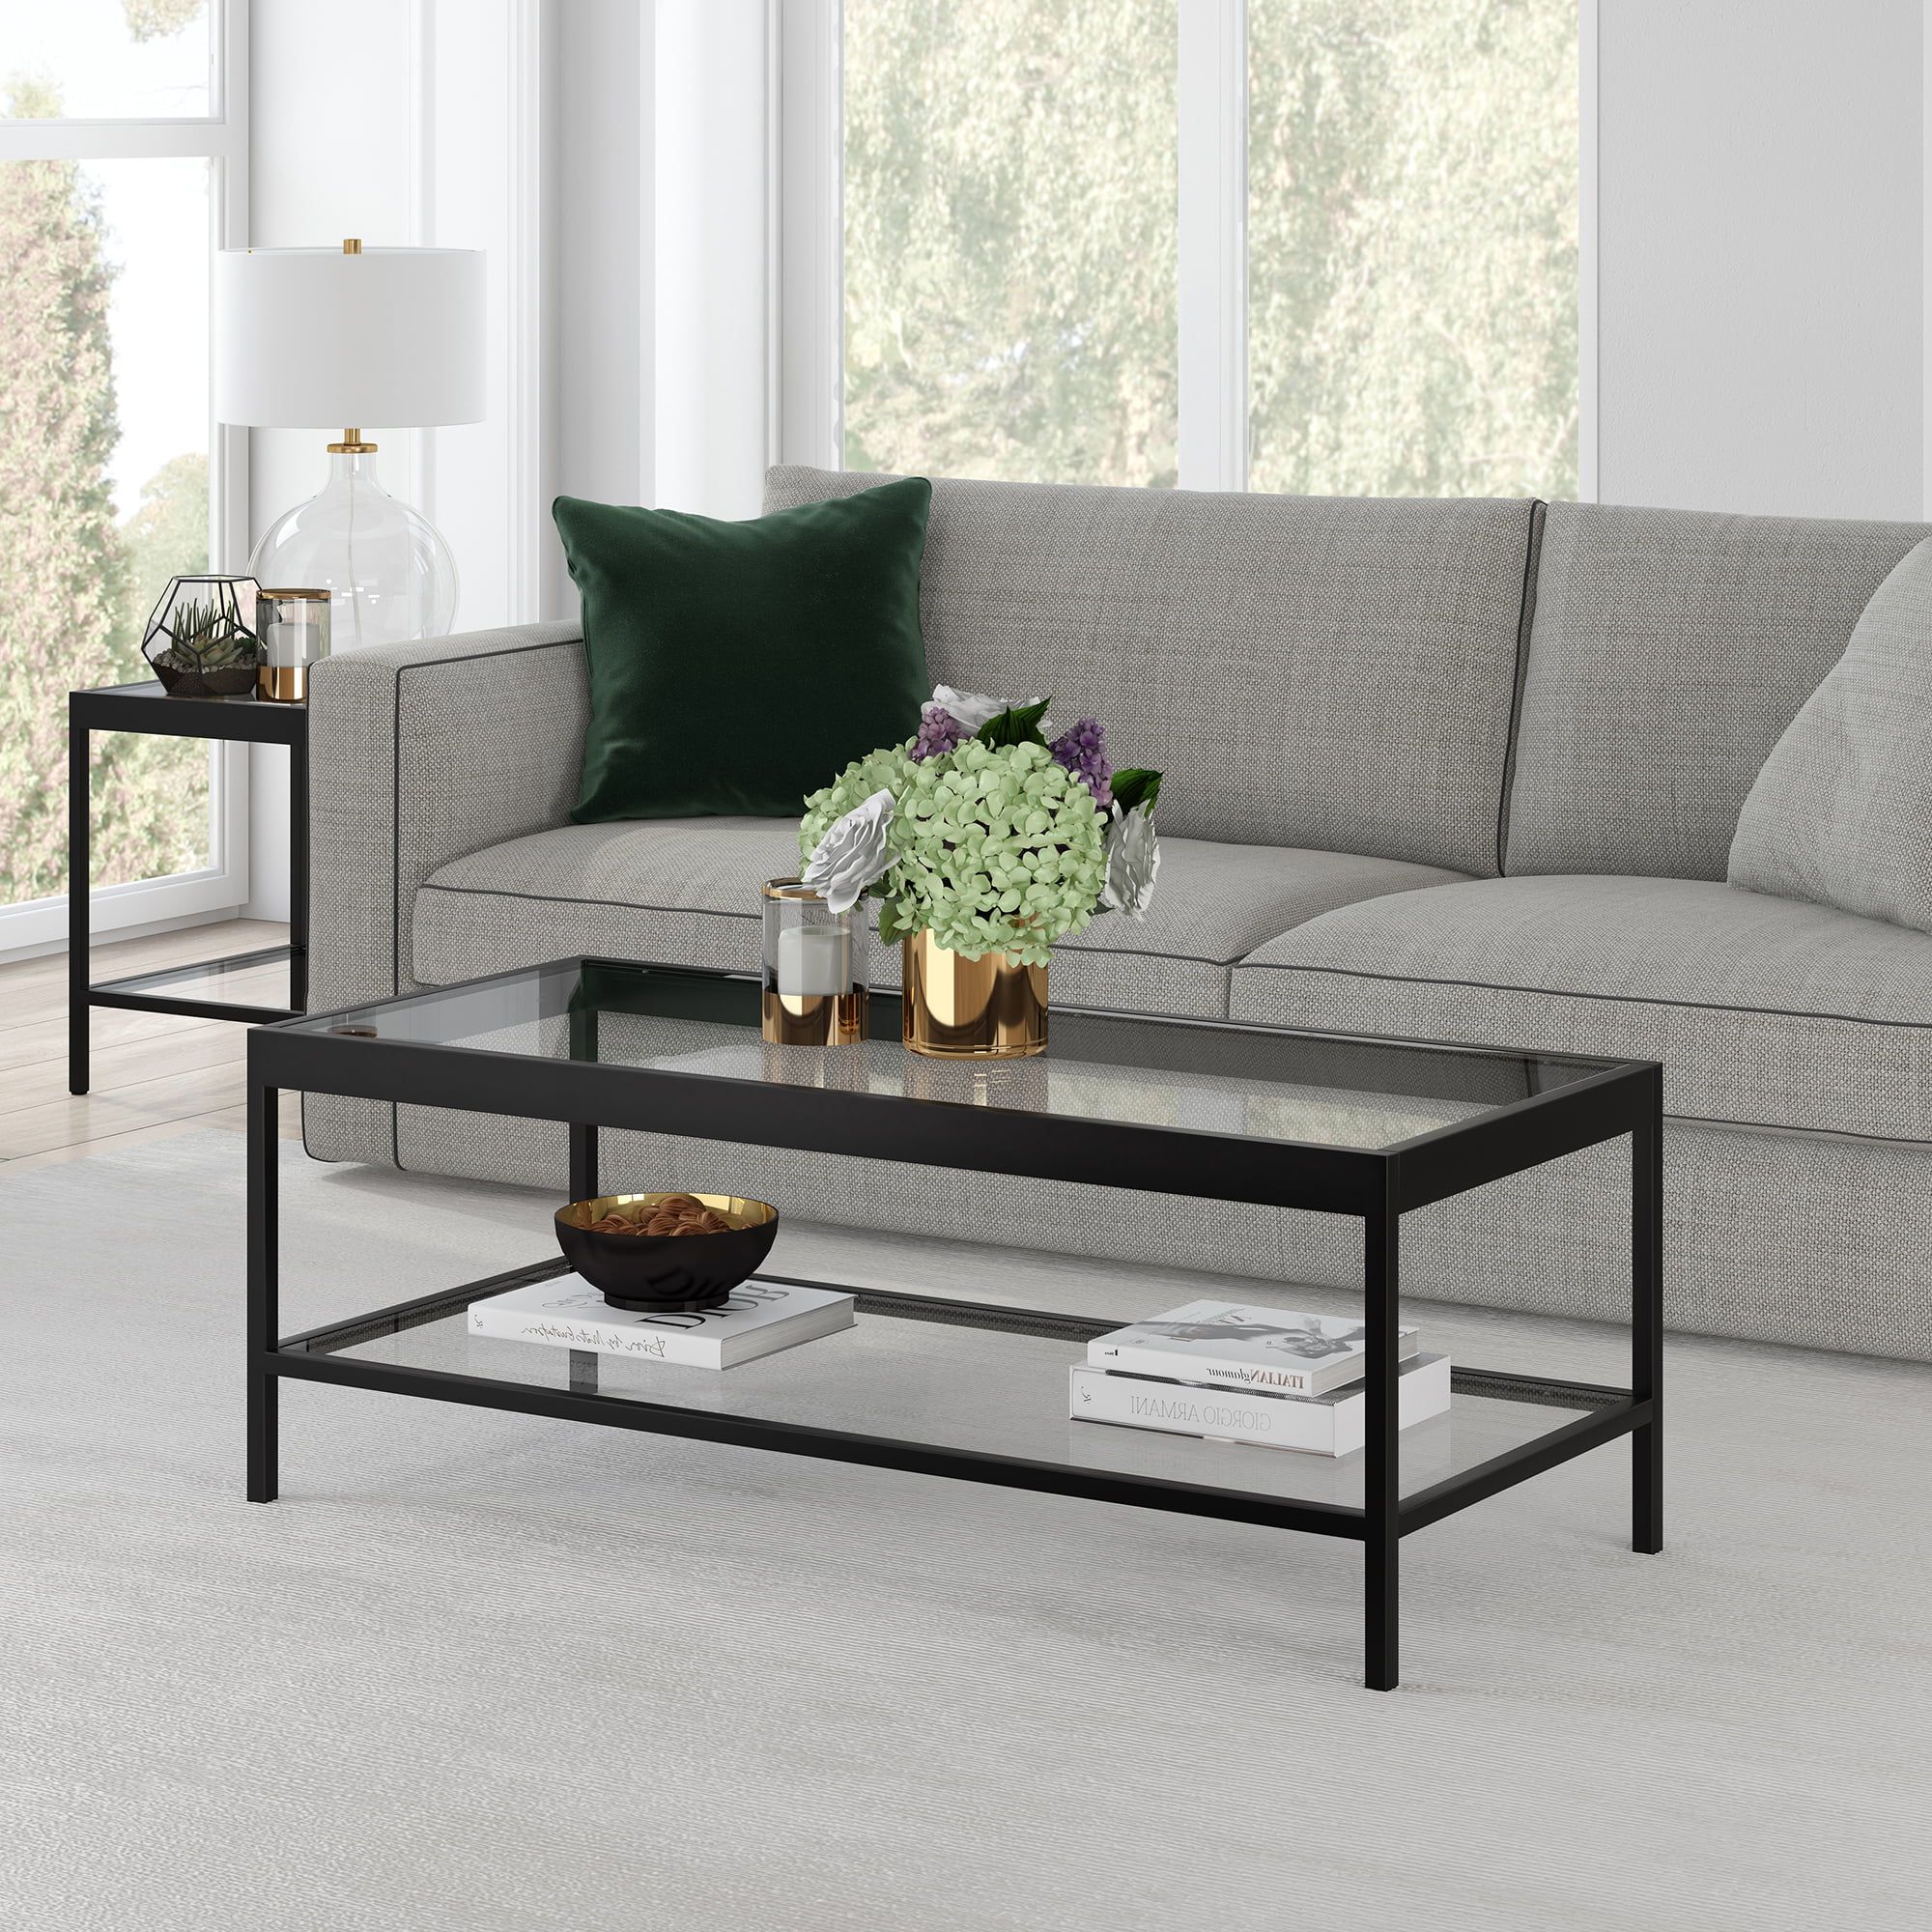 Preferred Modern Coffee Table With Open Shelf, Rectangular Table For Living Room Intended For Coffee Tables With Open Storage Shelves (View 8 of 15)